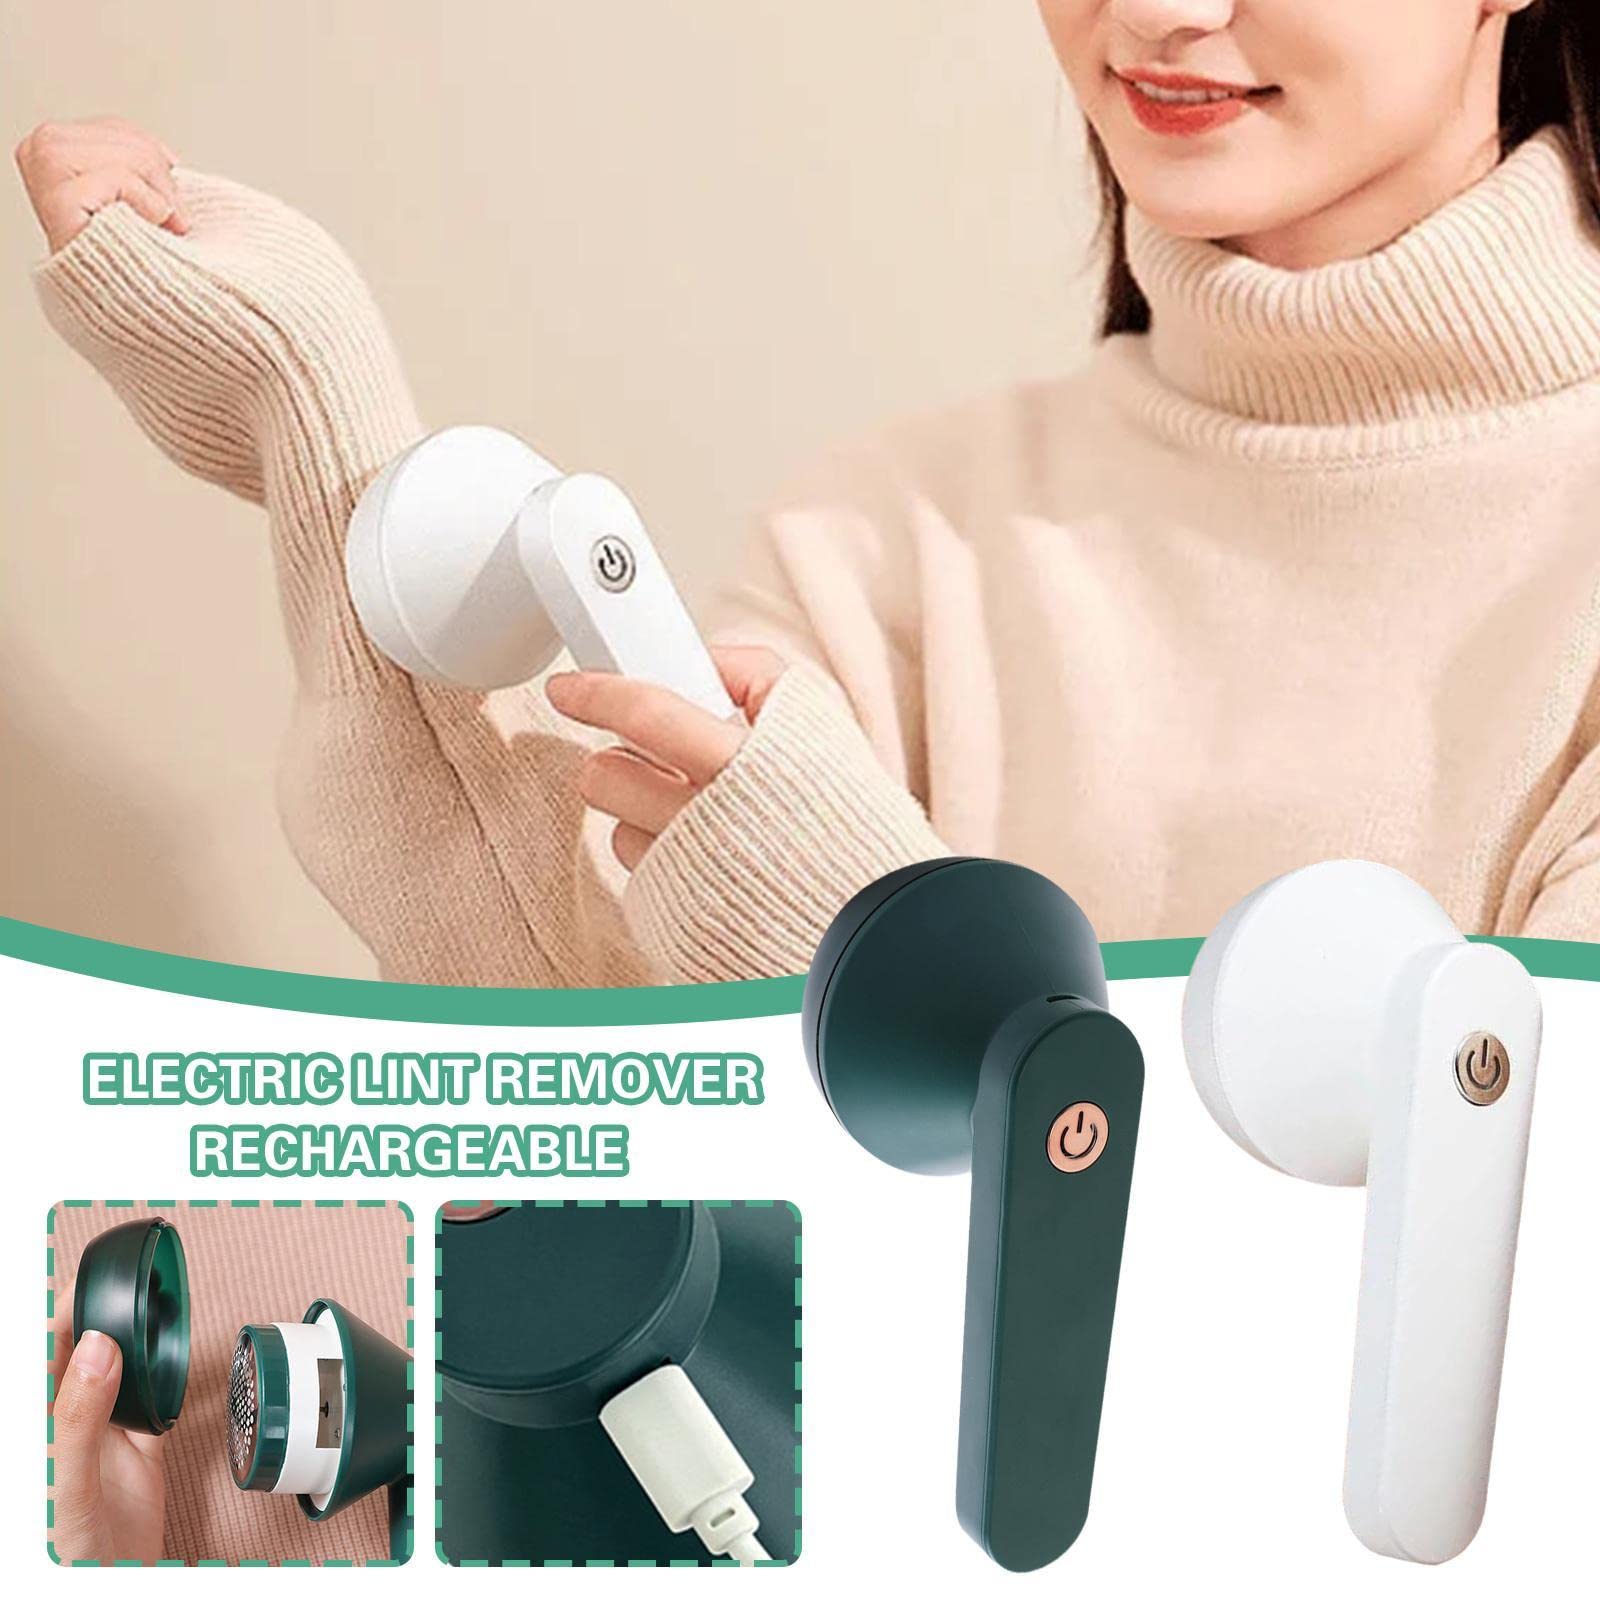 Dropship Electric Lint Shaver USB Rechargeable Fabric Clothes Lint